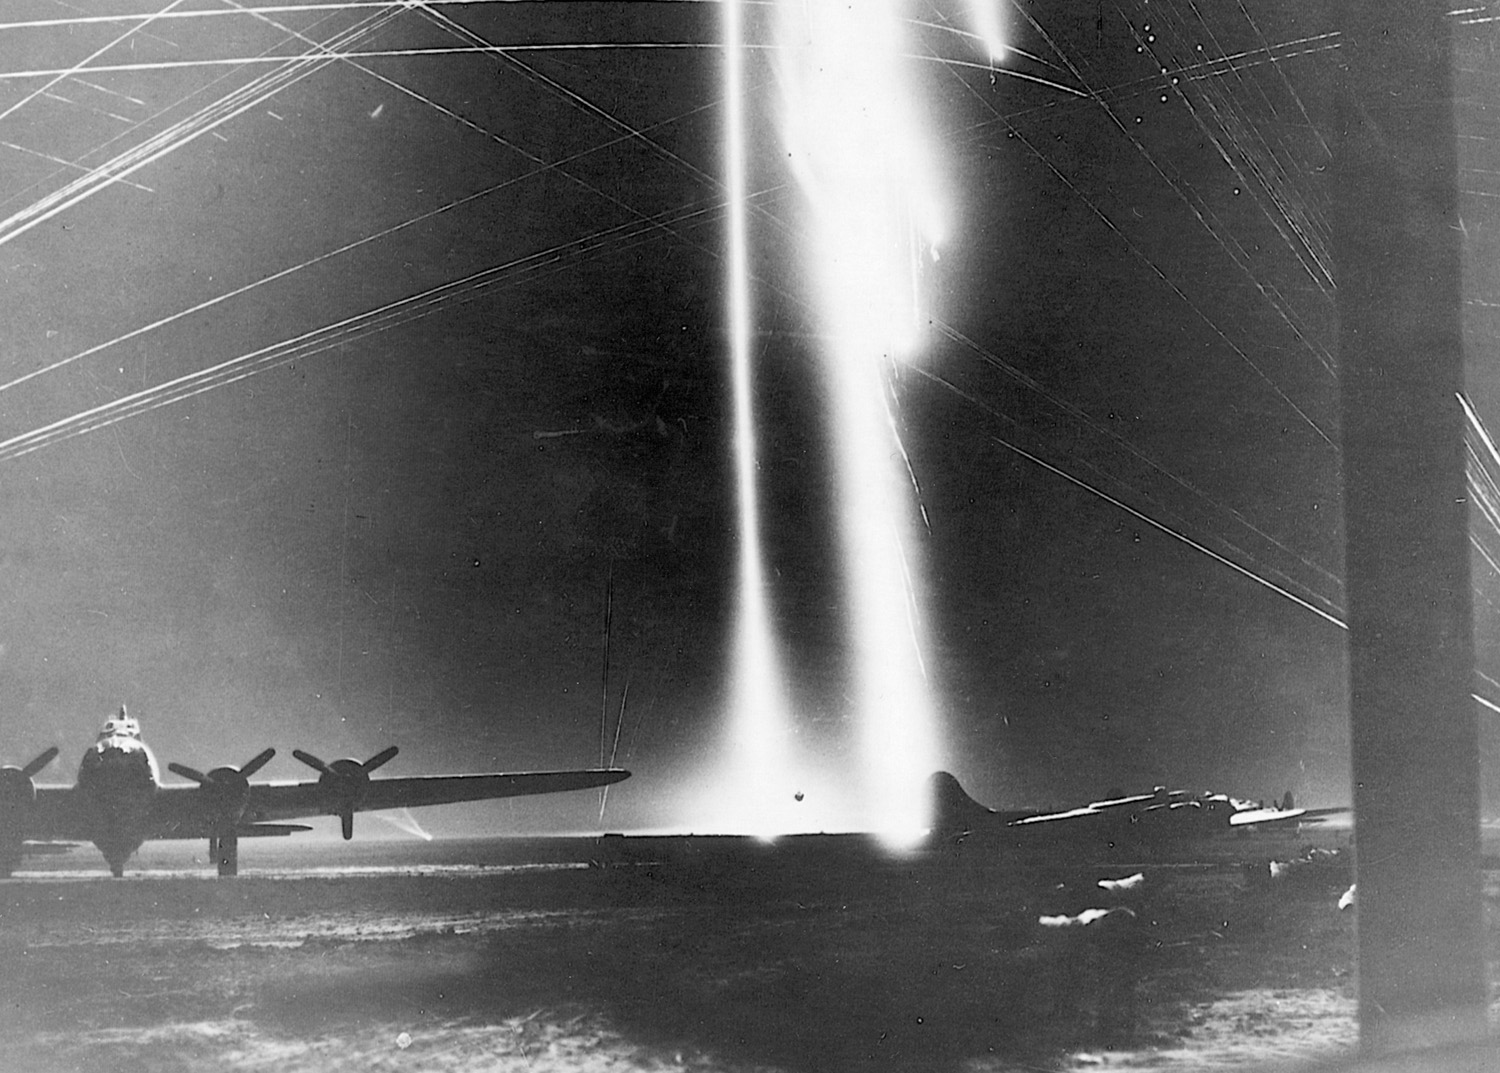 Antiaircraft fire and flares light up the night sky during a German raid on American shuttle bases in Russia.